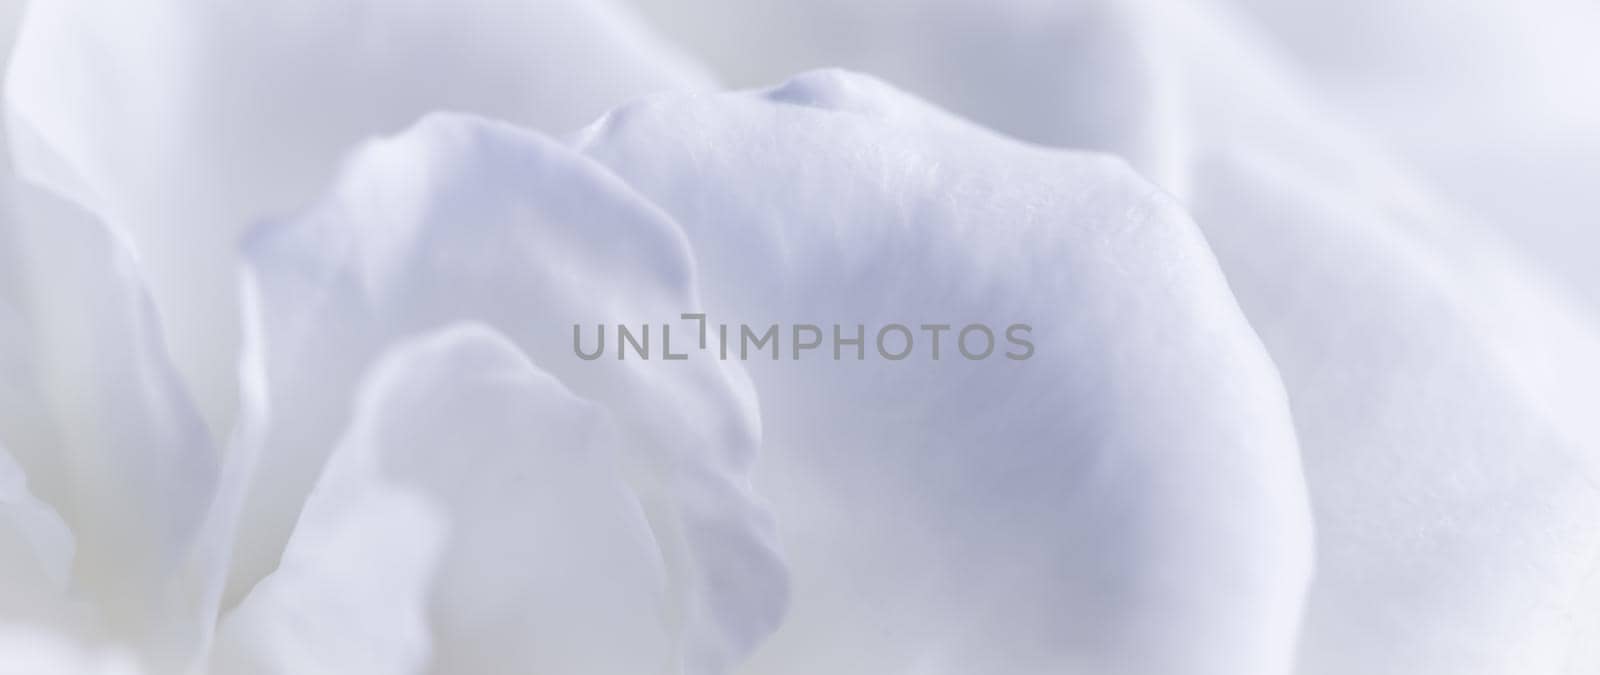 Abstract floral background, white rose flower petals. Macro flowers backdrop for holiday design. Soft focus.